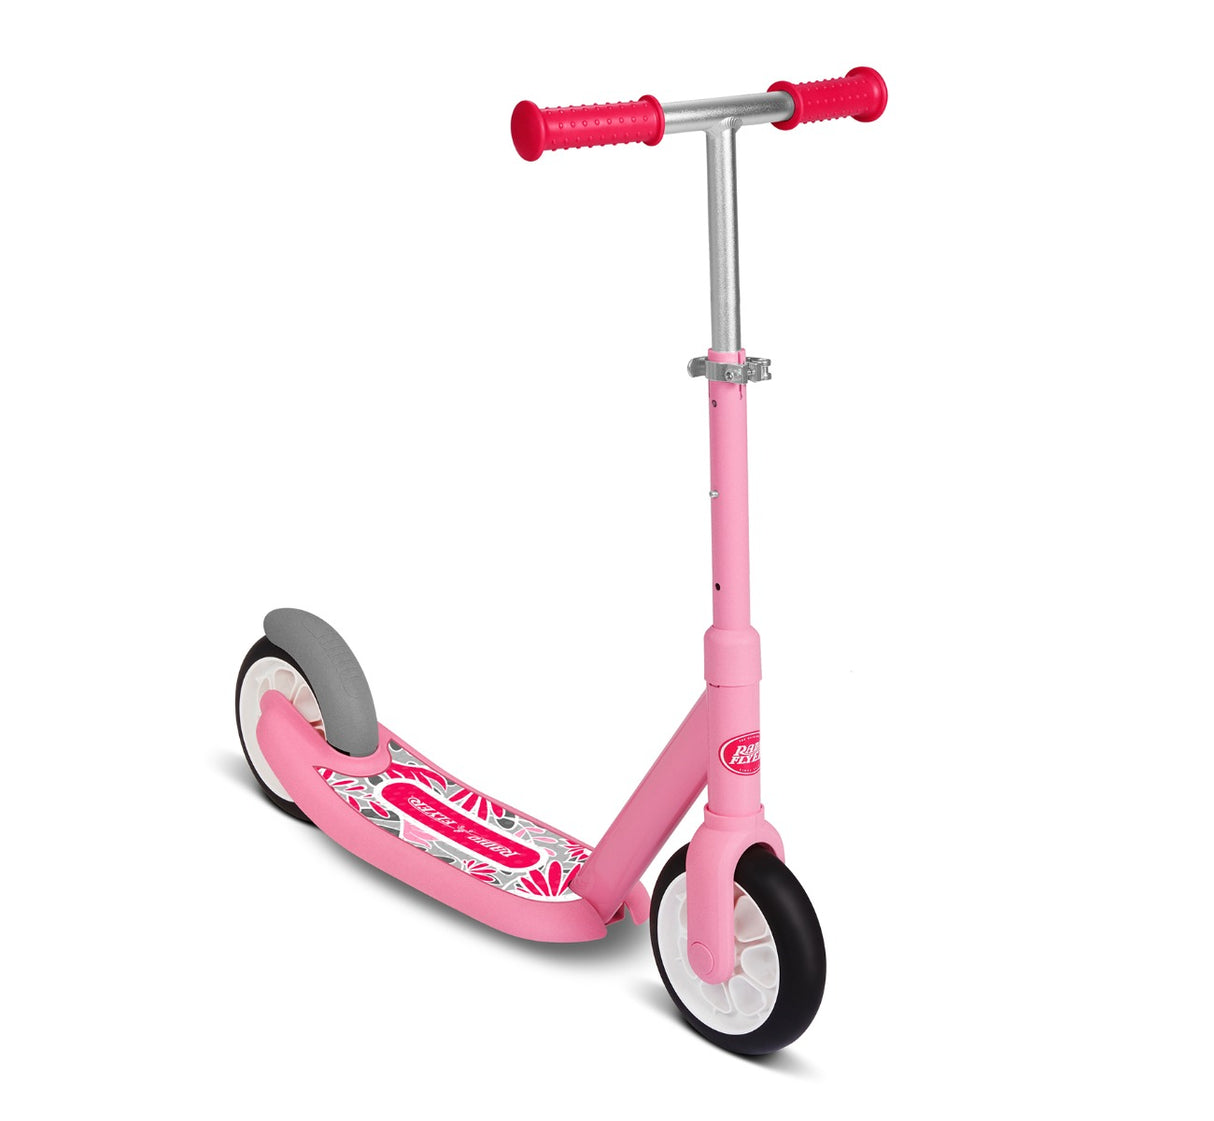 Kick & Glide Scooter Pink viewed from side